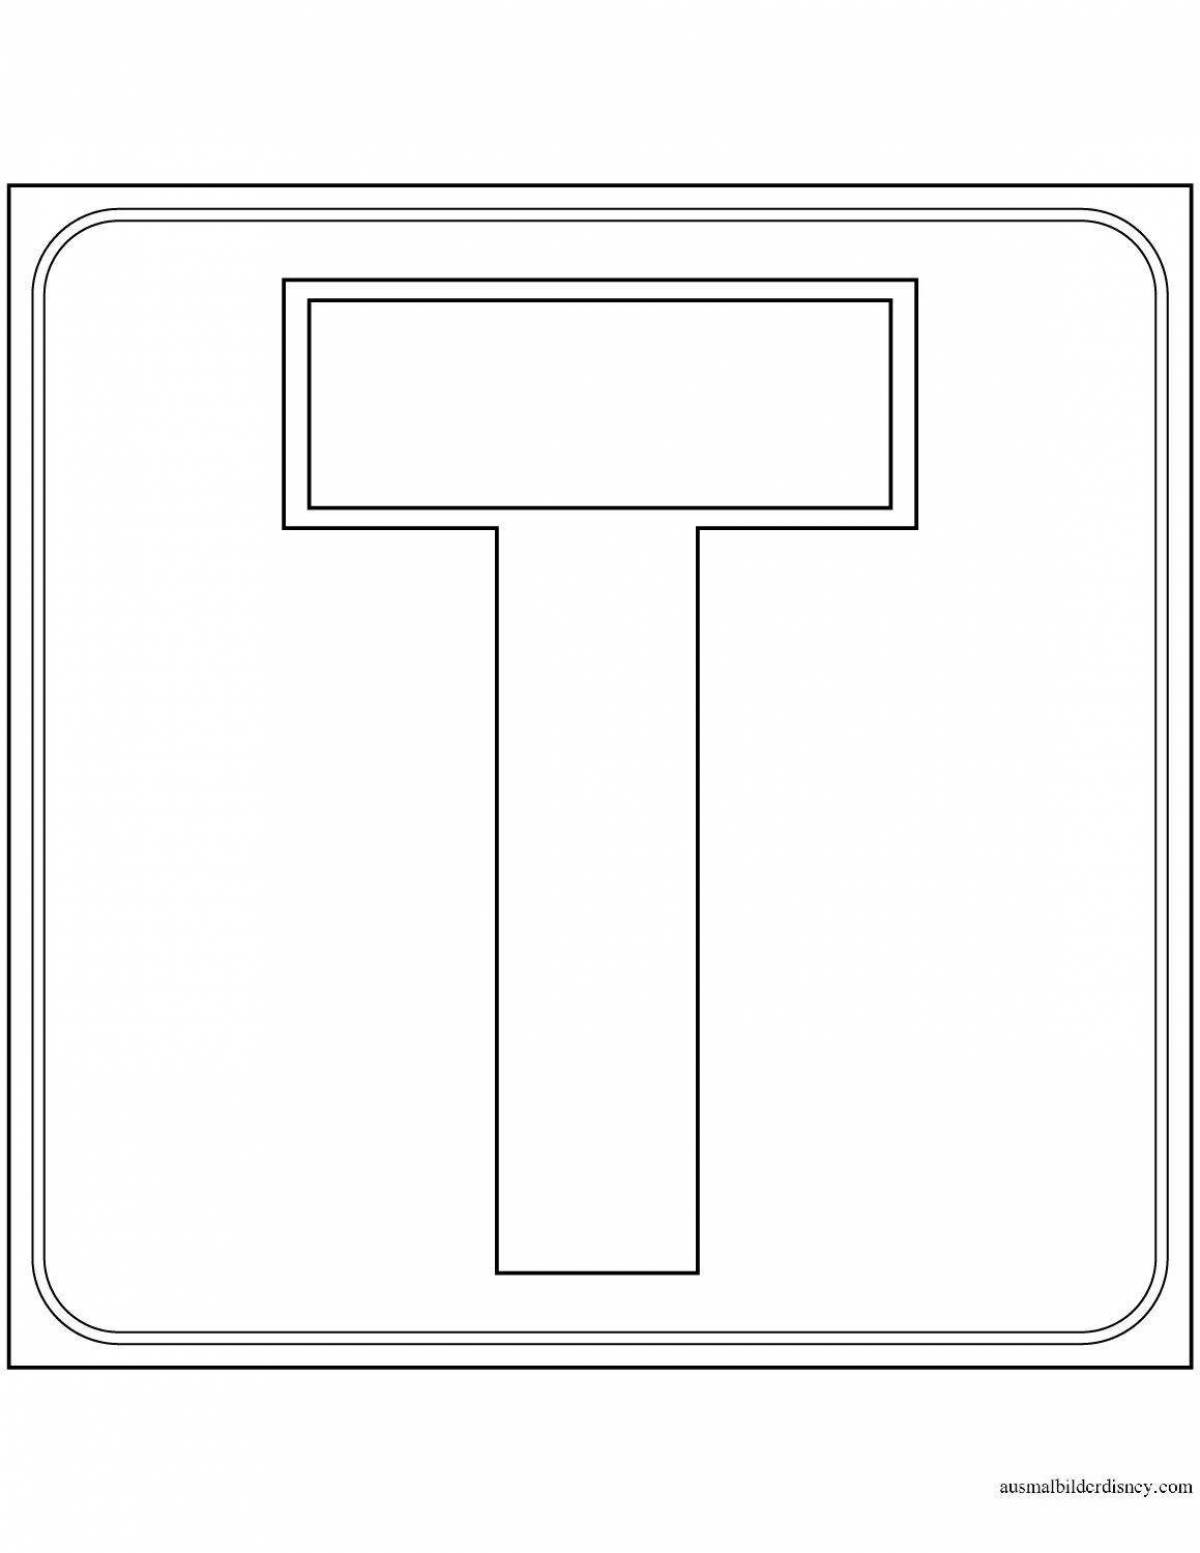 Coloring page dazzling main road sign